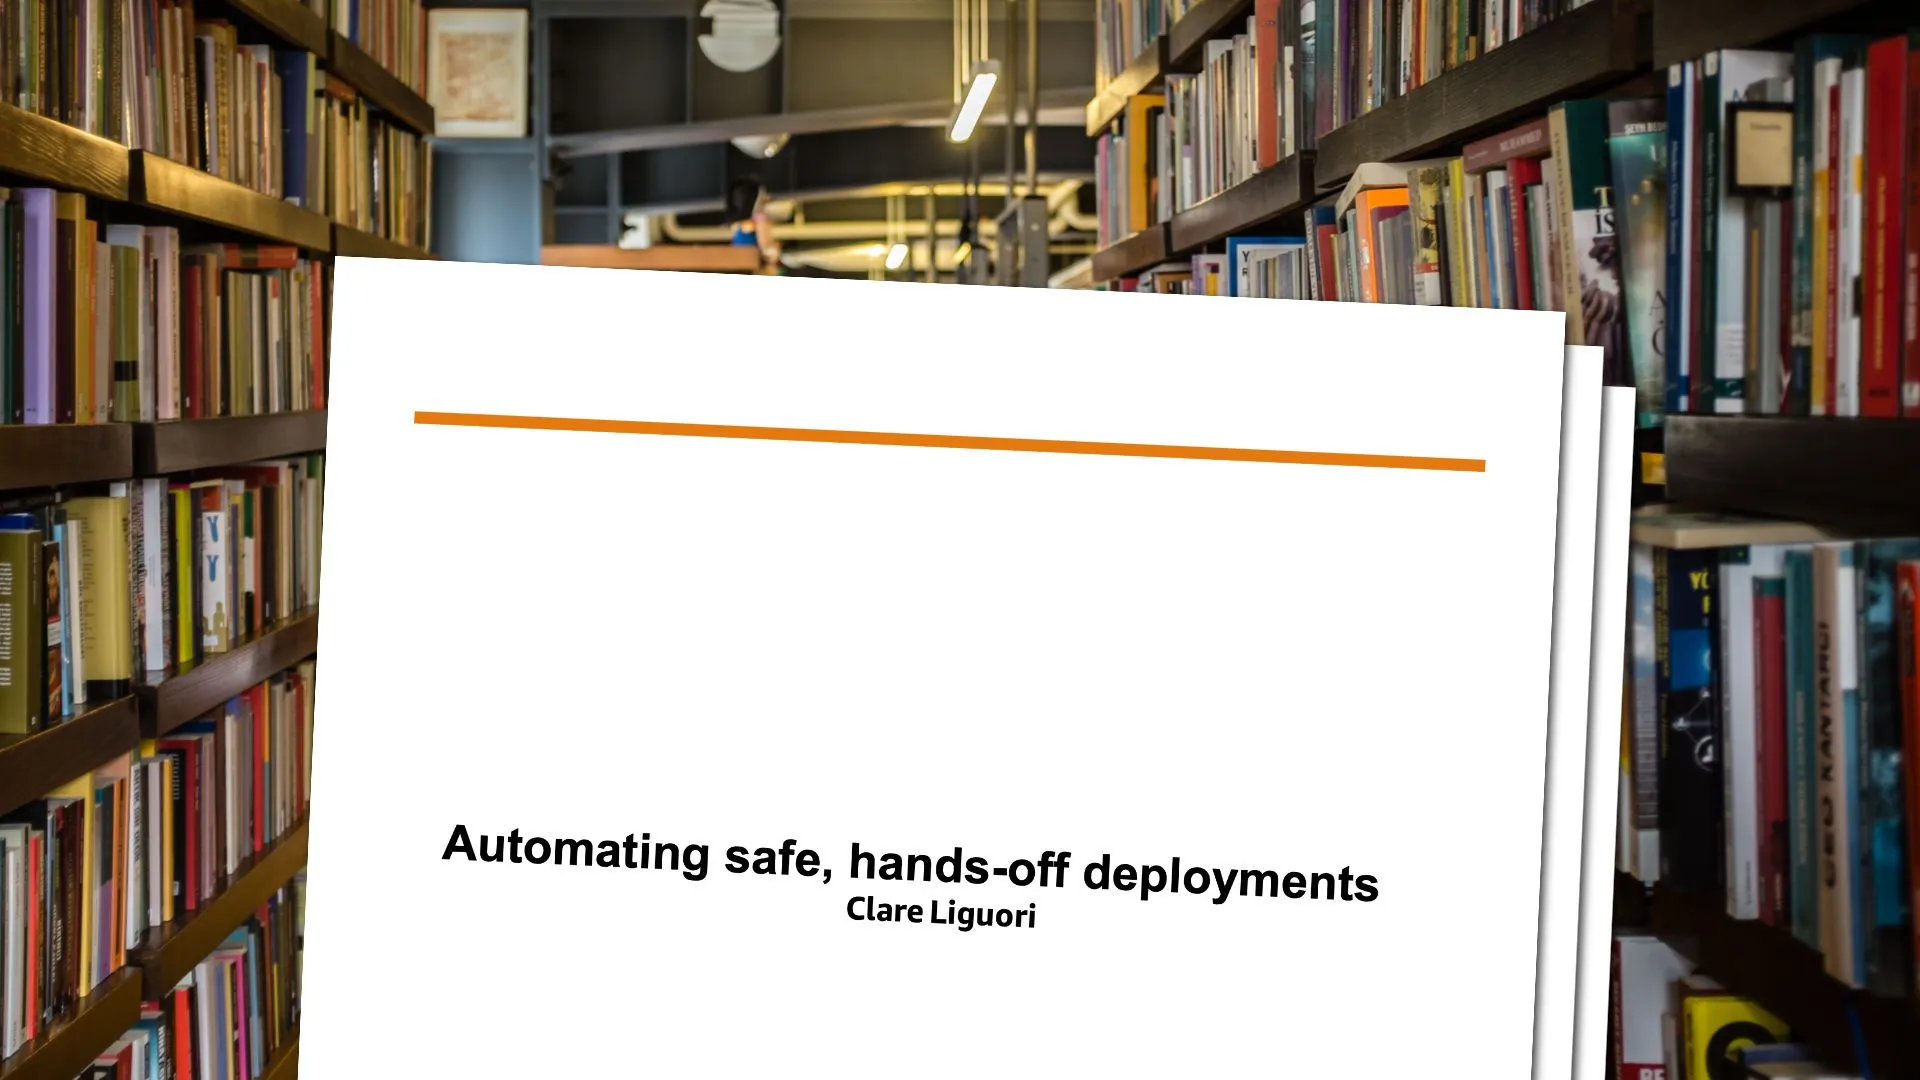 Automating safe, hands-off deployments